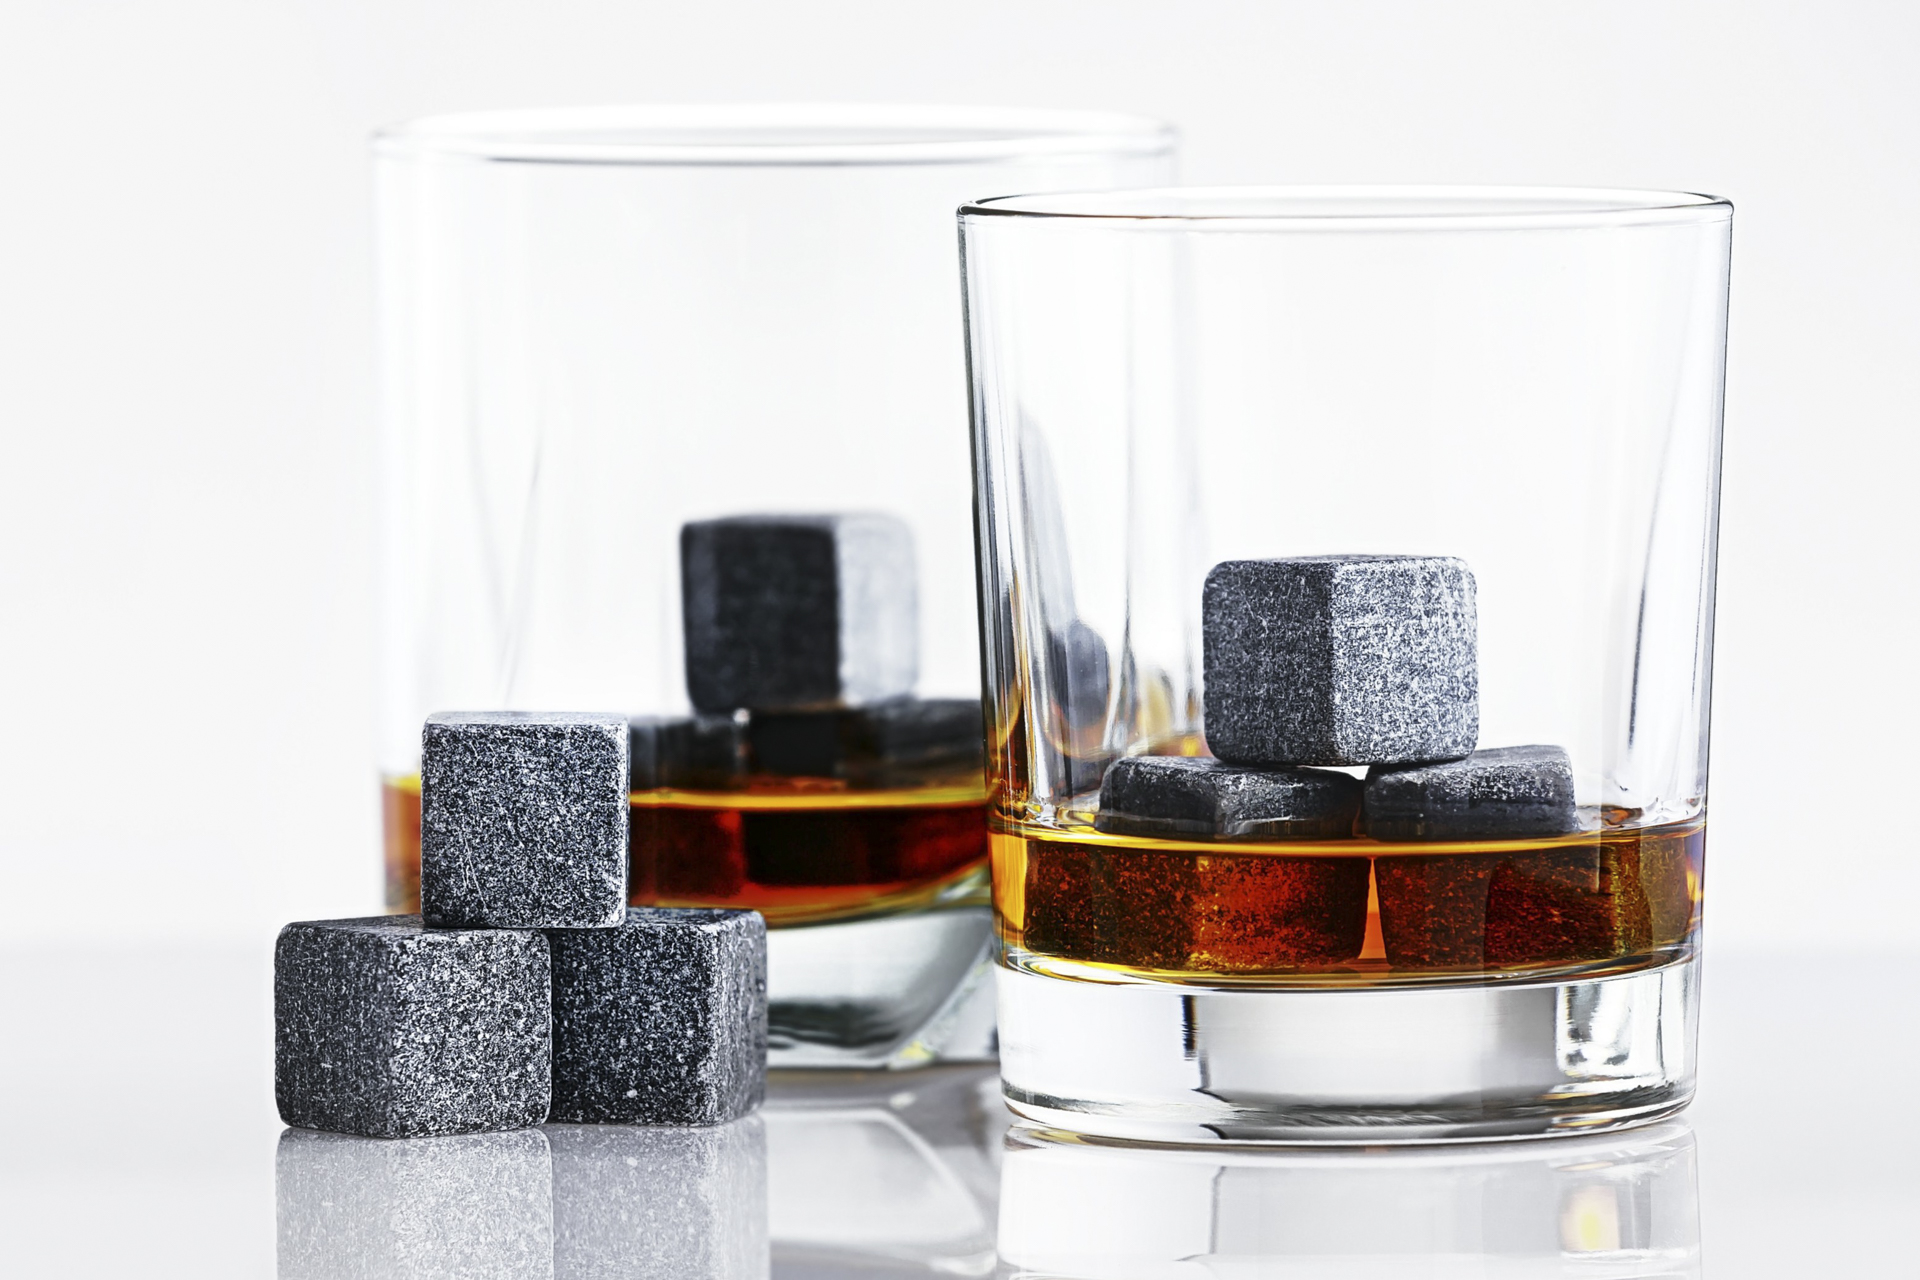 https://www.themanual.com/wp-content/uploads/sites/9/2018/06/whiskey-stones-vs-ice-7724.jpg?fit=800%2C533&p=1